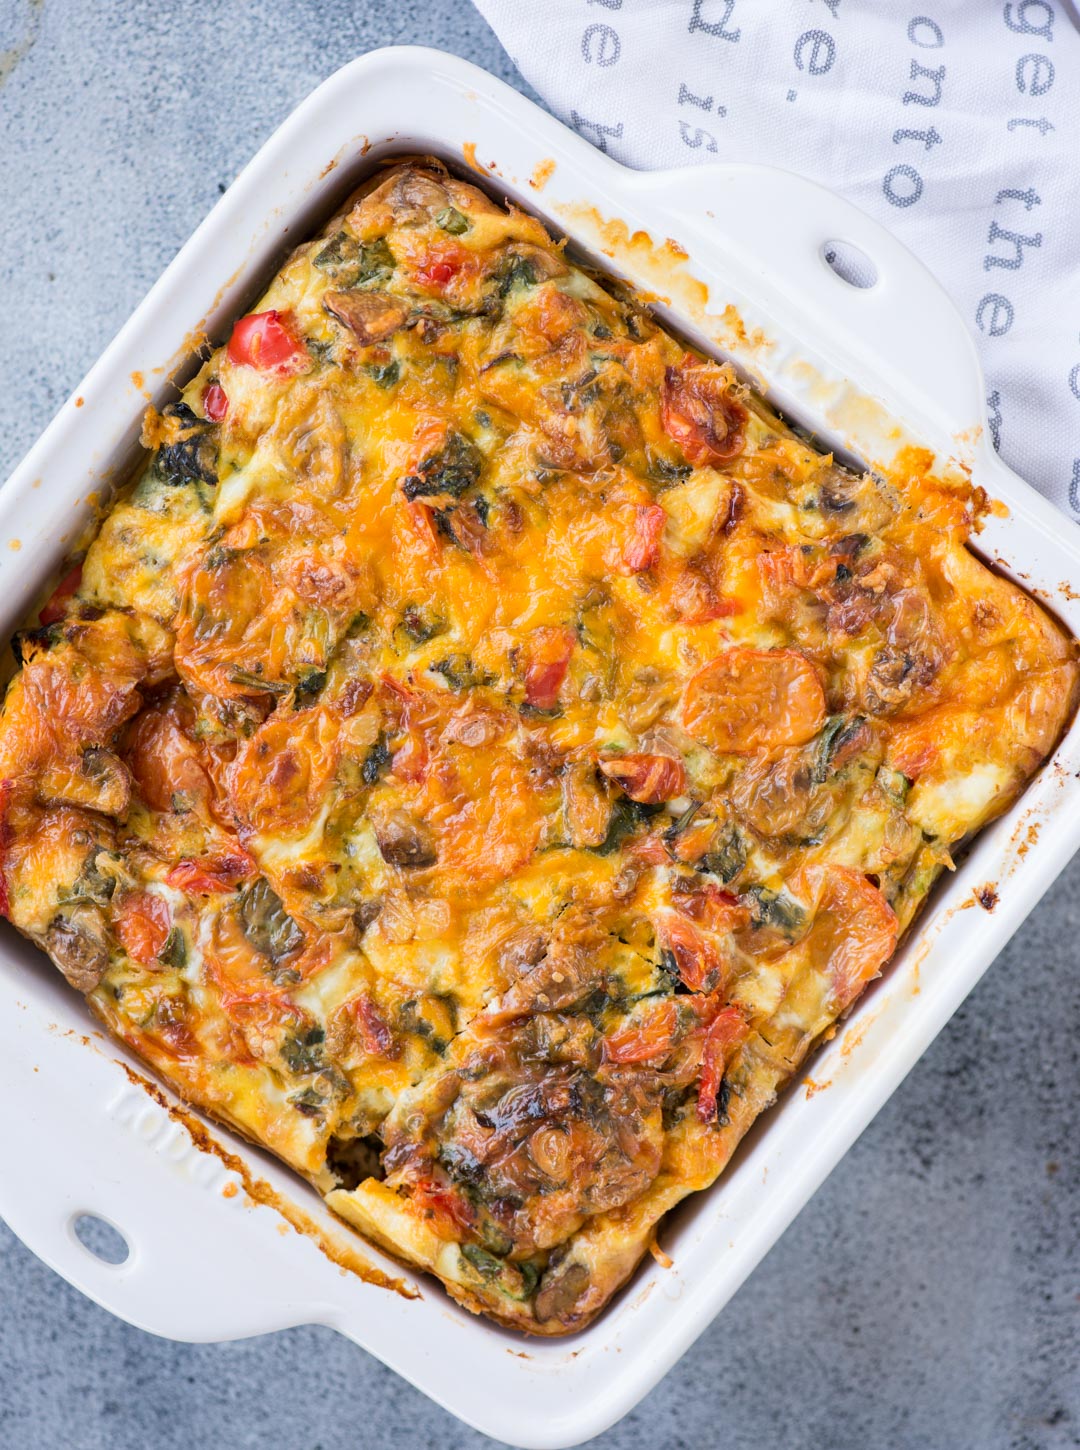 Easy breakfast casserole with bread loaded vegetables, egg, bread and topped with cheese. This Breakfast Casserole recipe can be made ahead and perfect to feed a big crowd.